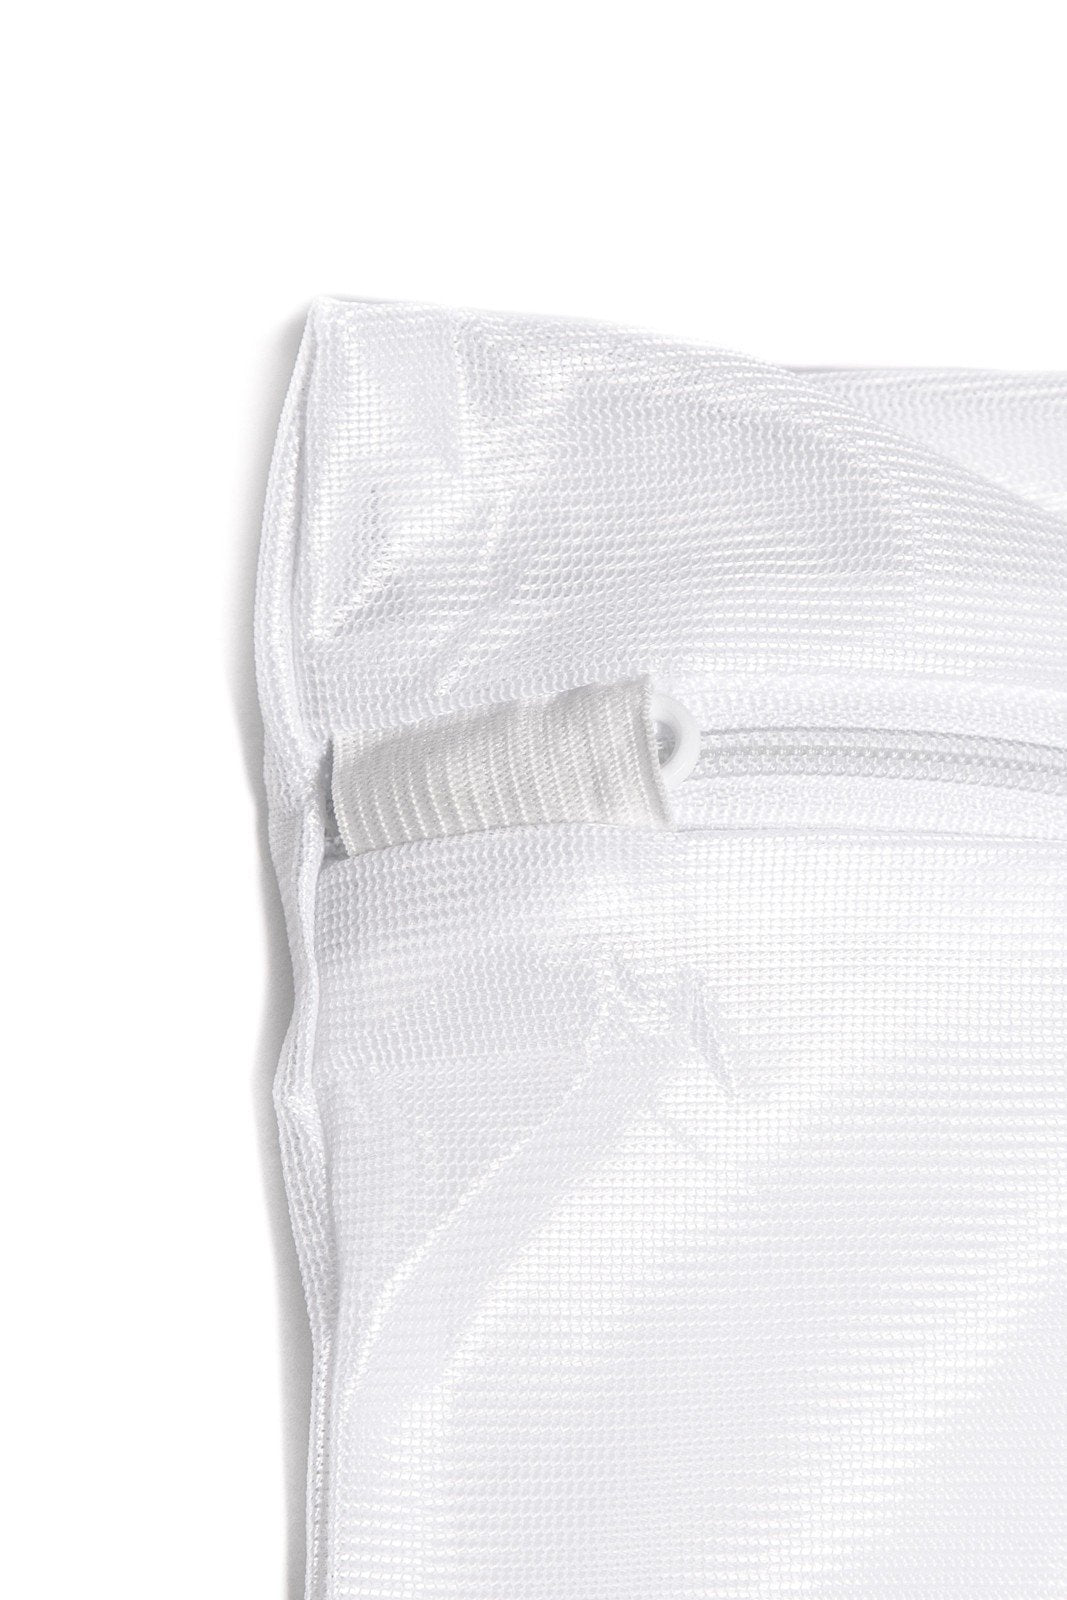 Soft mesh laundry wash bag-to protect your luxurious silk products